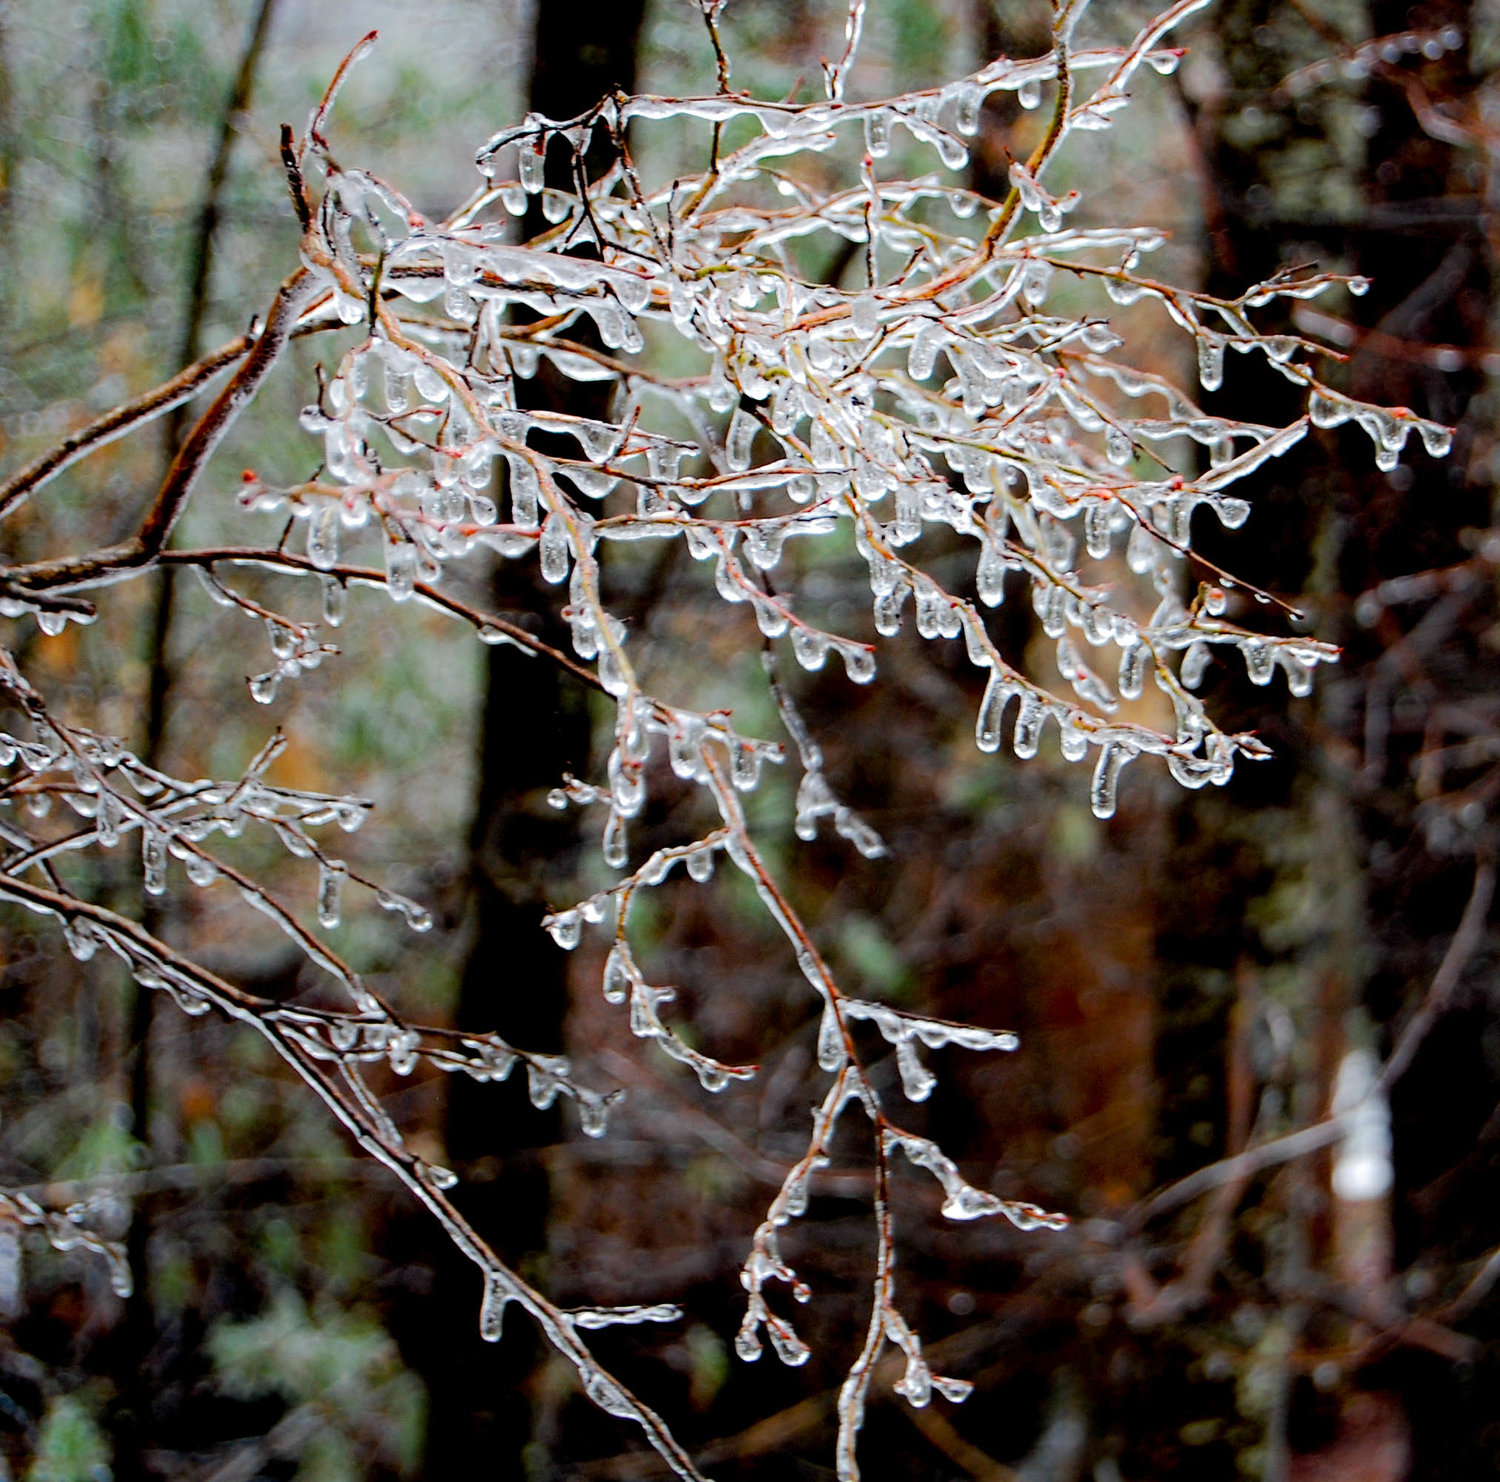 While not a fan of freezing temperatures, I have to admit that the ice makes for pretty pictures!